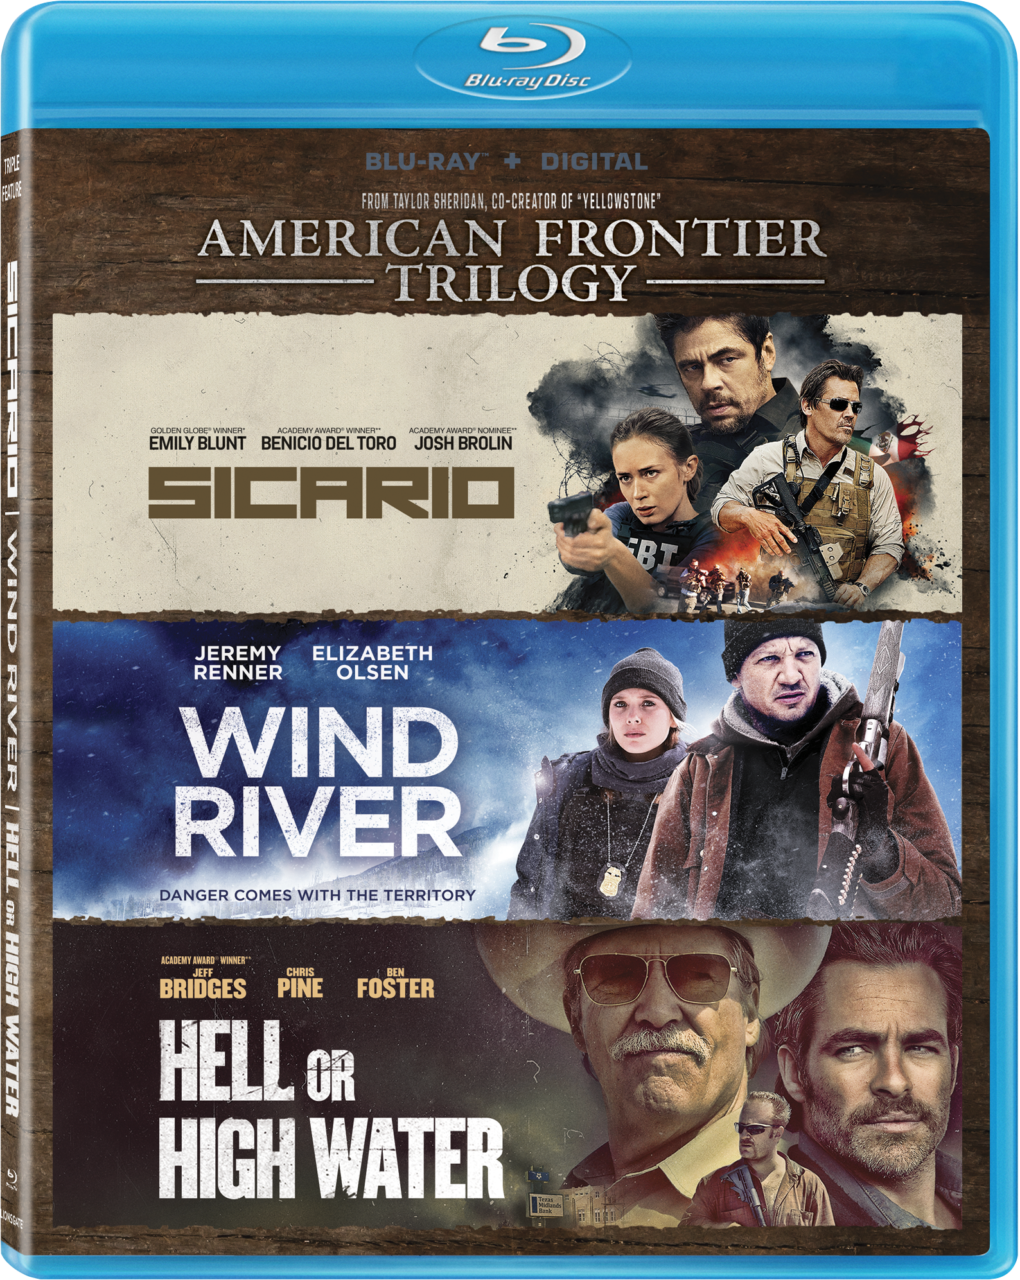 American Frontier Trilogy (Sicario, Wind River, Hell Or High Water) cover (Lionsgate)